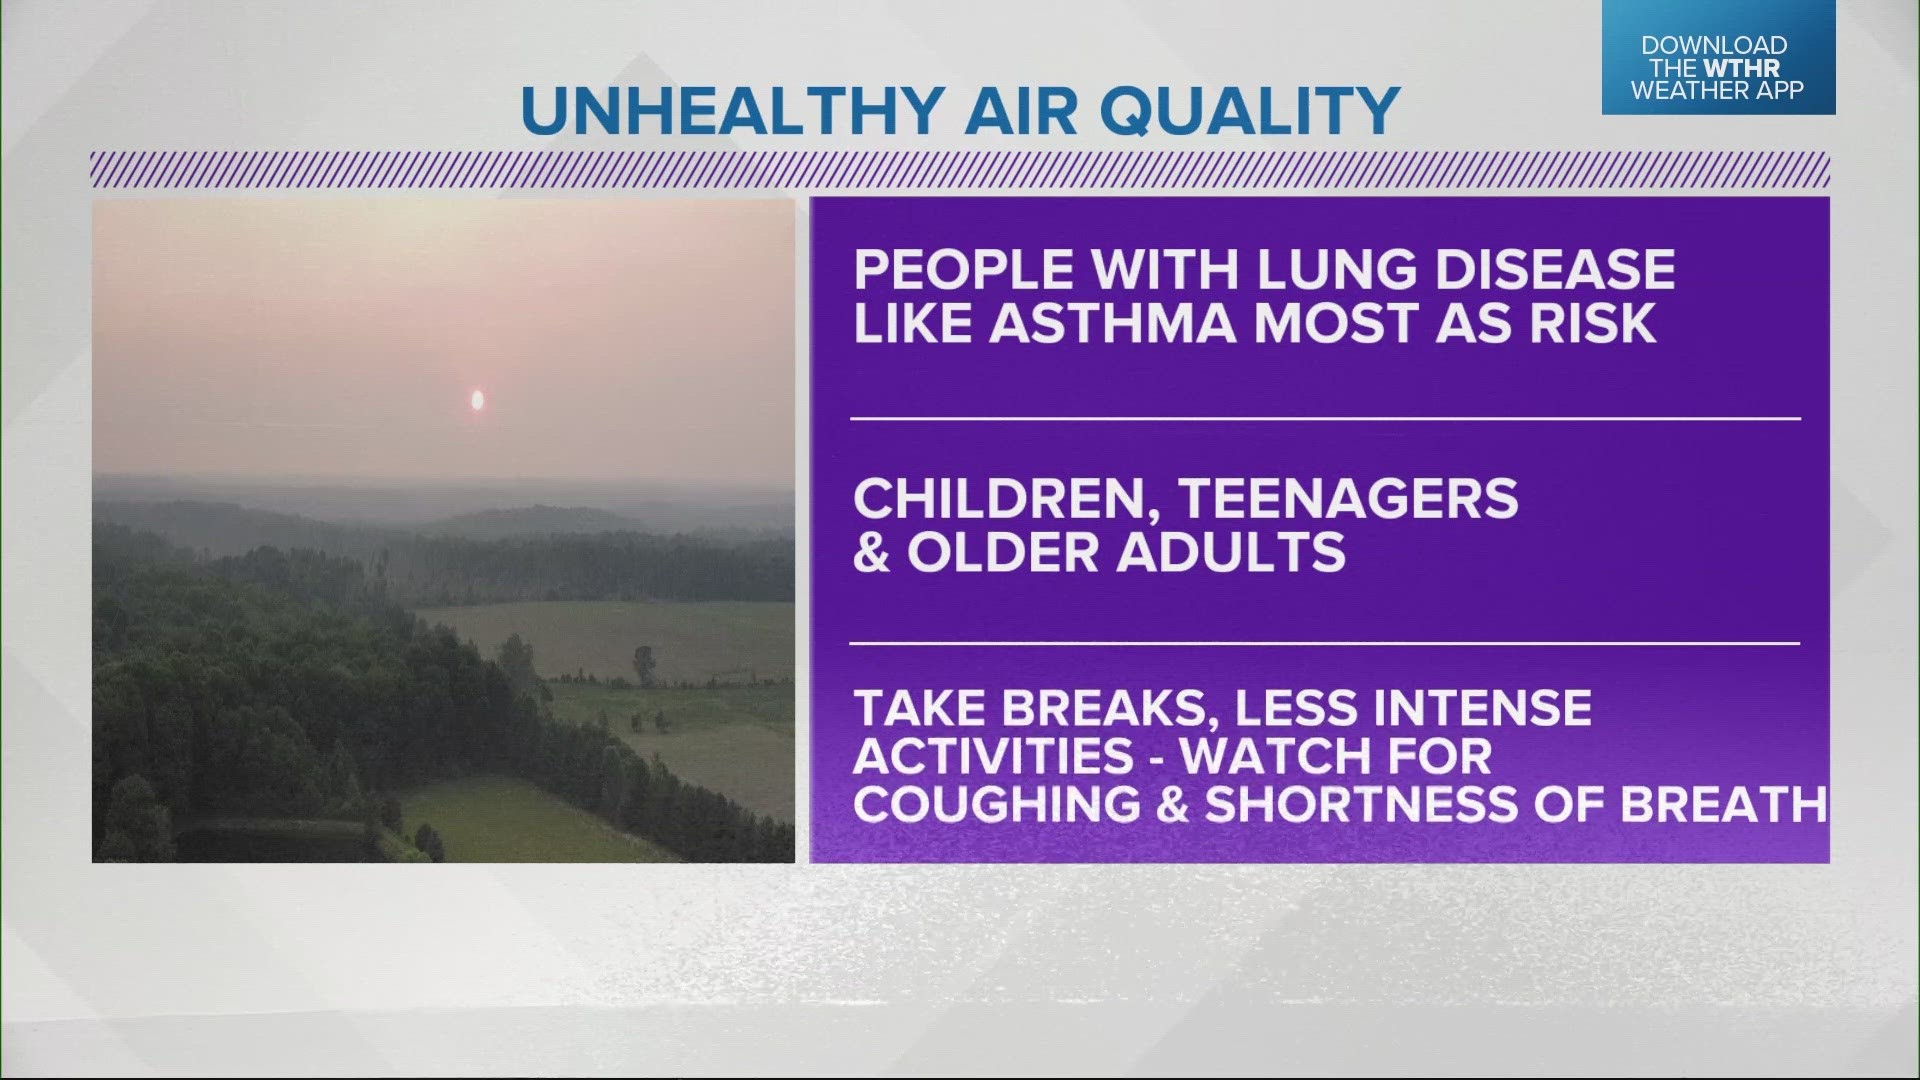 The haze is bringing poor air quality to Central Indiana. Here are some tips to help deal with it.